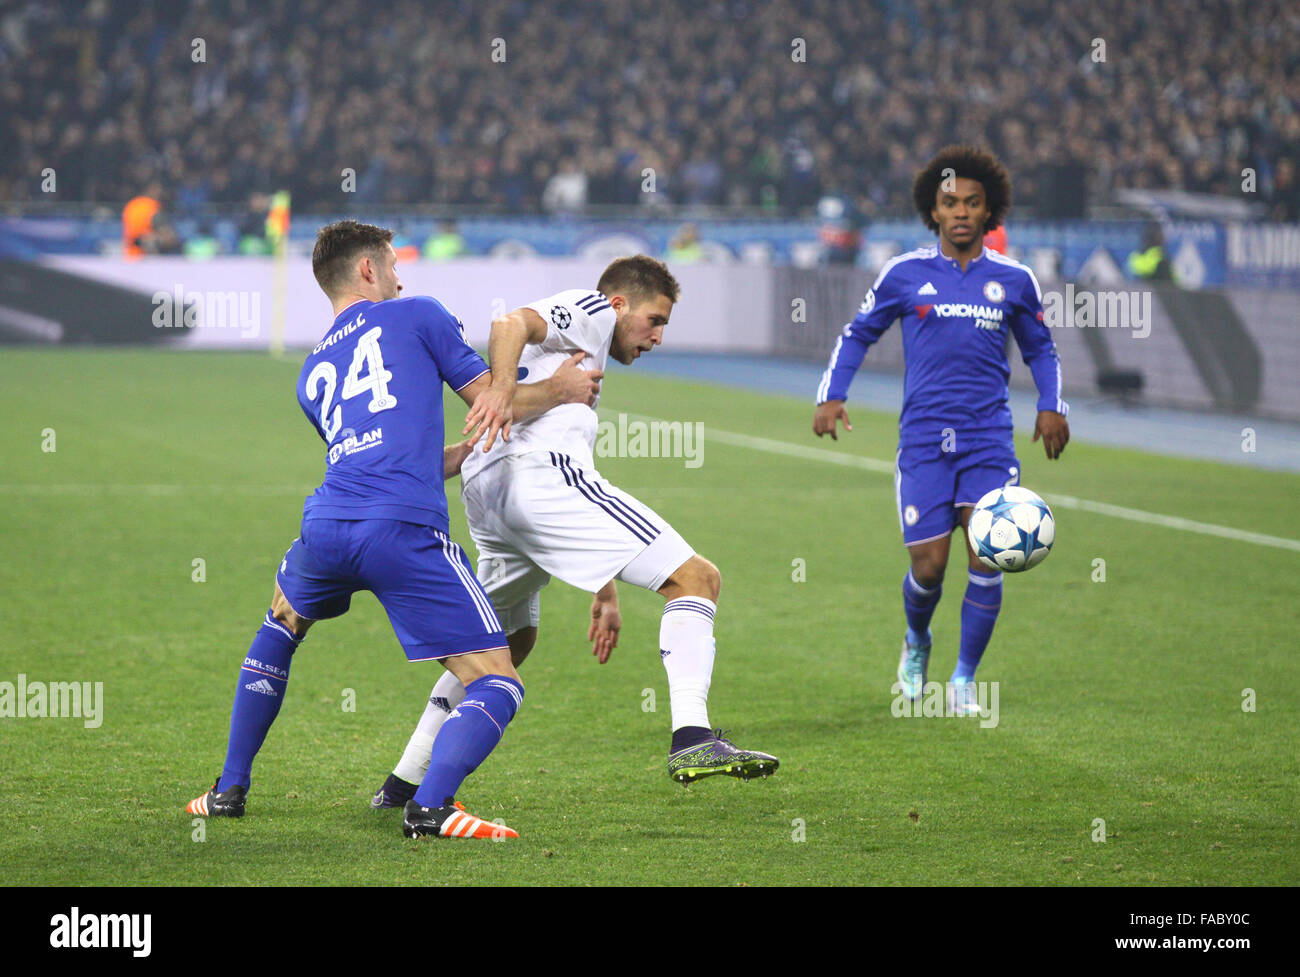 KYIV, UKRAINE - OCTOBER 20, 2015: Artem Kravets of Dynamo Kyiv (C) fights for a ball with Gary Cahill and Willian of Chelsea dur Stock Photo